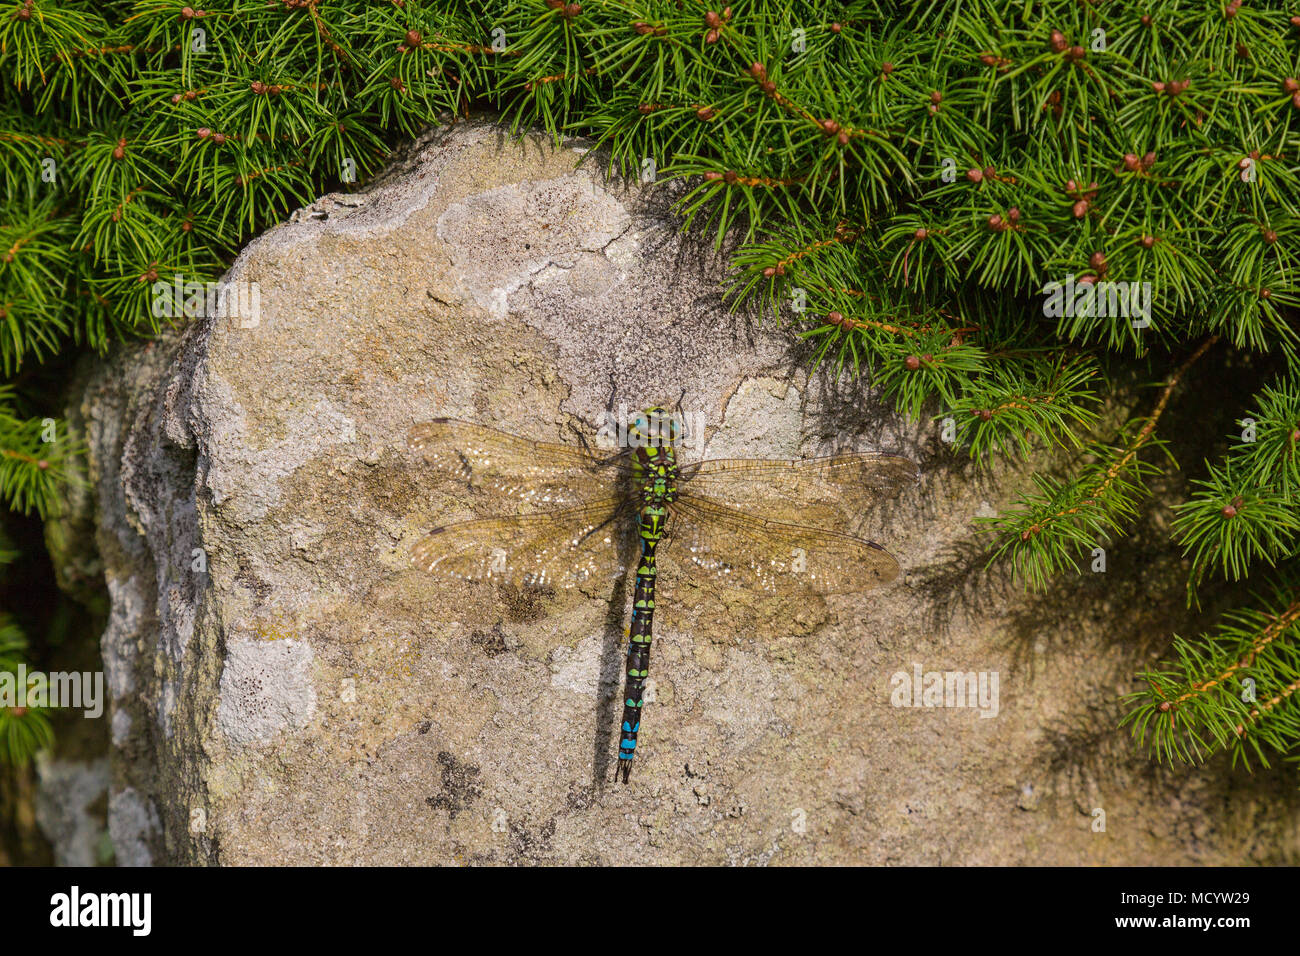 A male Southern Hawker (Aeshna cyanea) dragonfly one of the largest species in the UK, basking on a block of limestone in Britain, England, UK Stock Photo